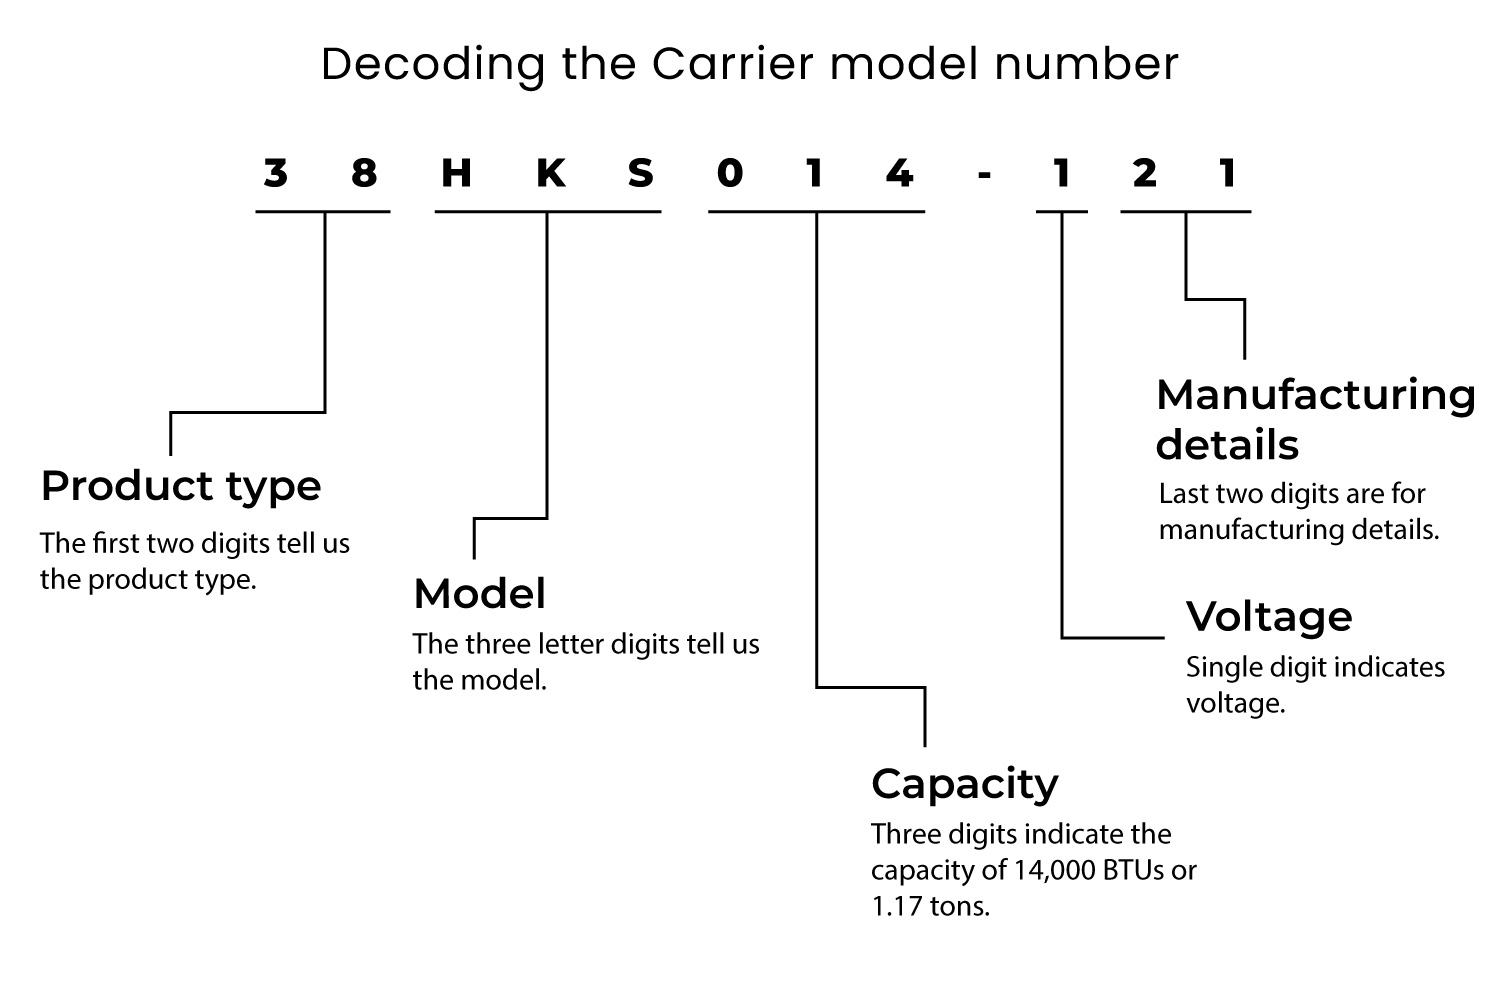 Carrier model serial number decoded